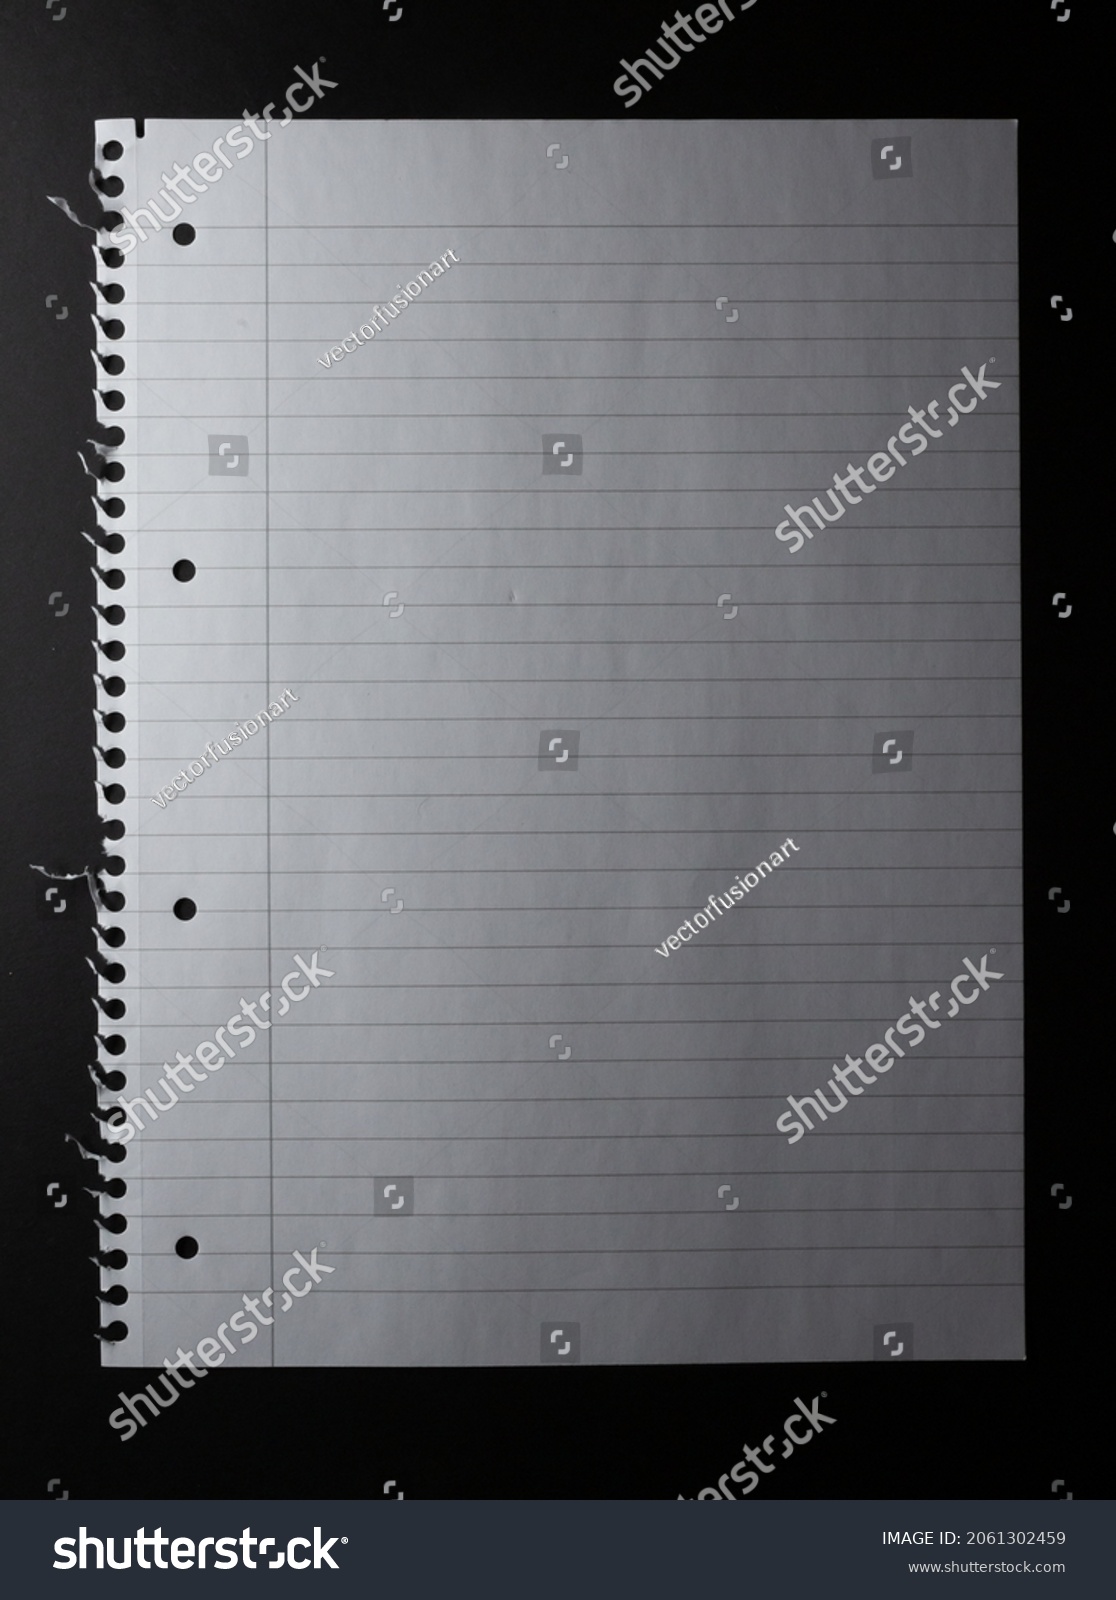 Hole punched sheet of lined white notebook paper, torn from spiral binding, on black background. monochrome light and texture, abstract background image. #2061302459